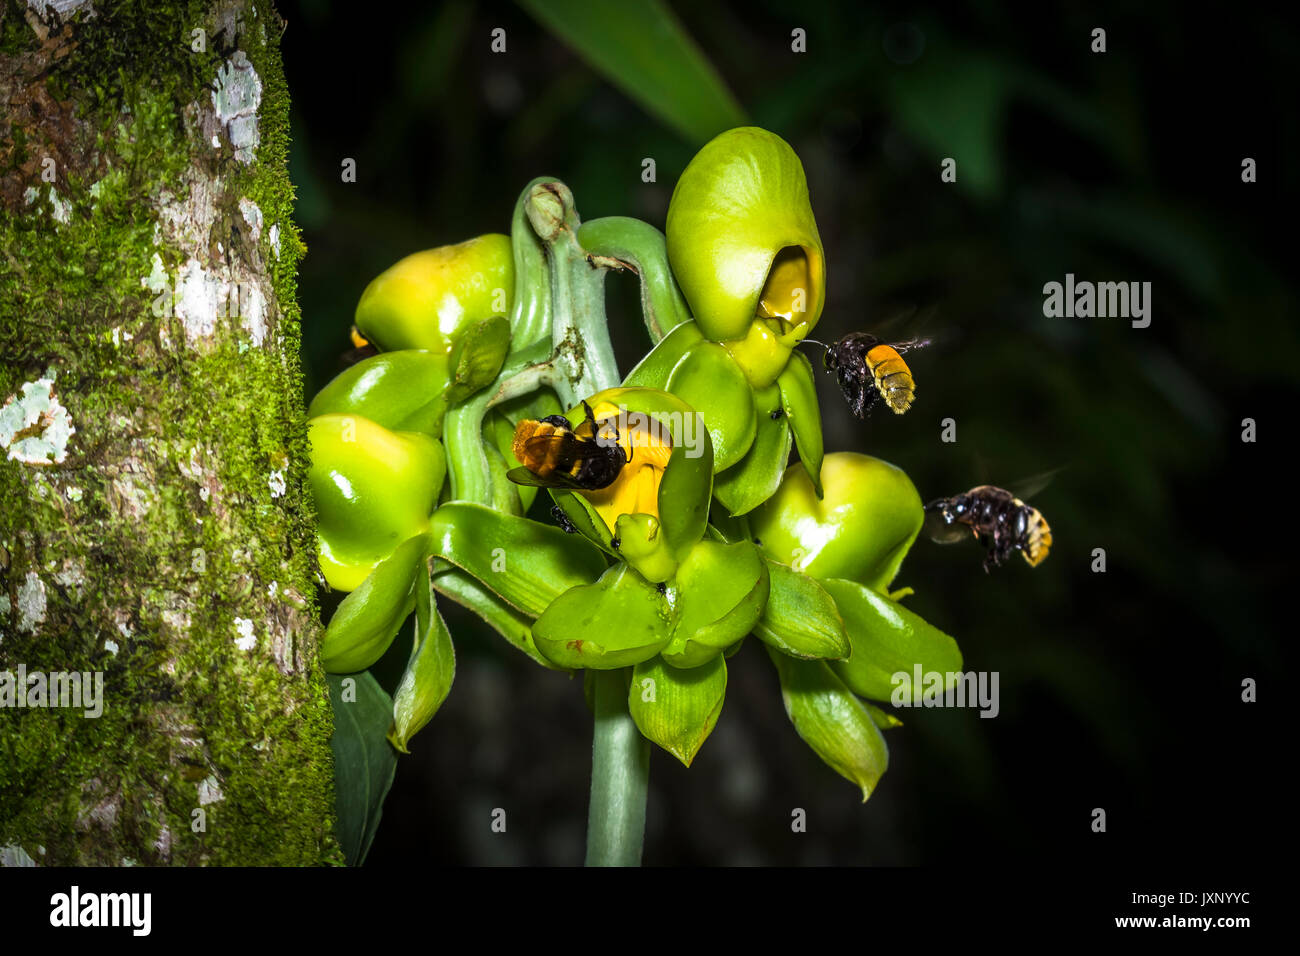 Green catasetum viridiflavum orchid with big bumble bees approaching in flight and feeding from the flowers Stock Photo